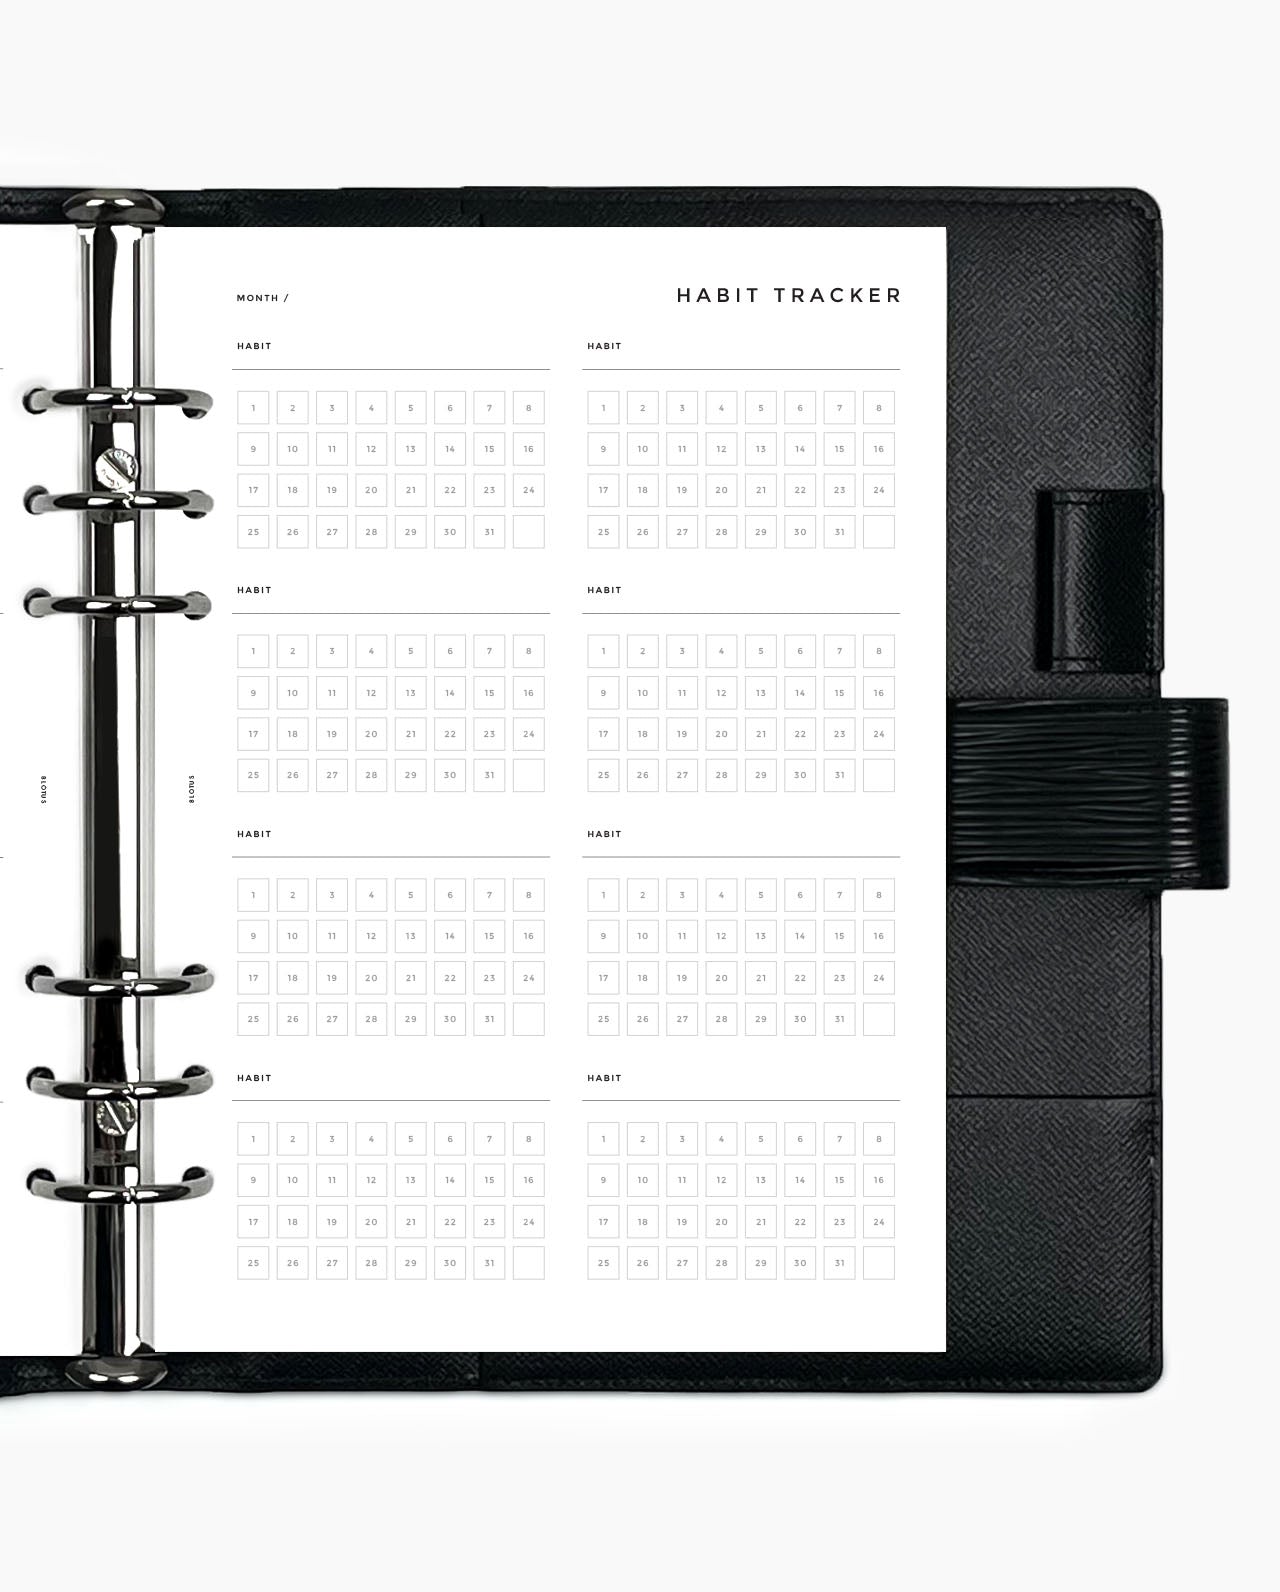 MN090 - Daily Habit Tracker - Monthly